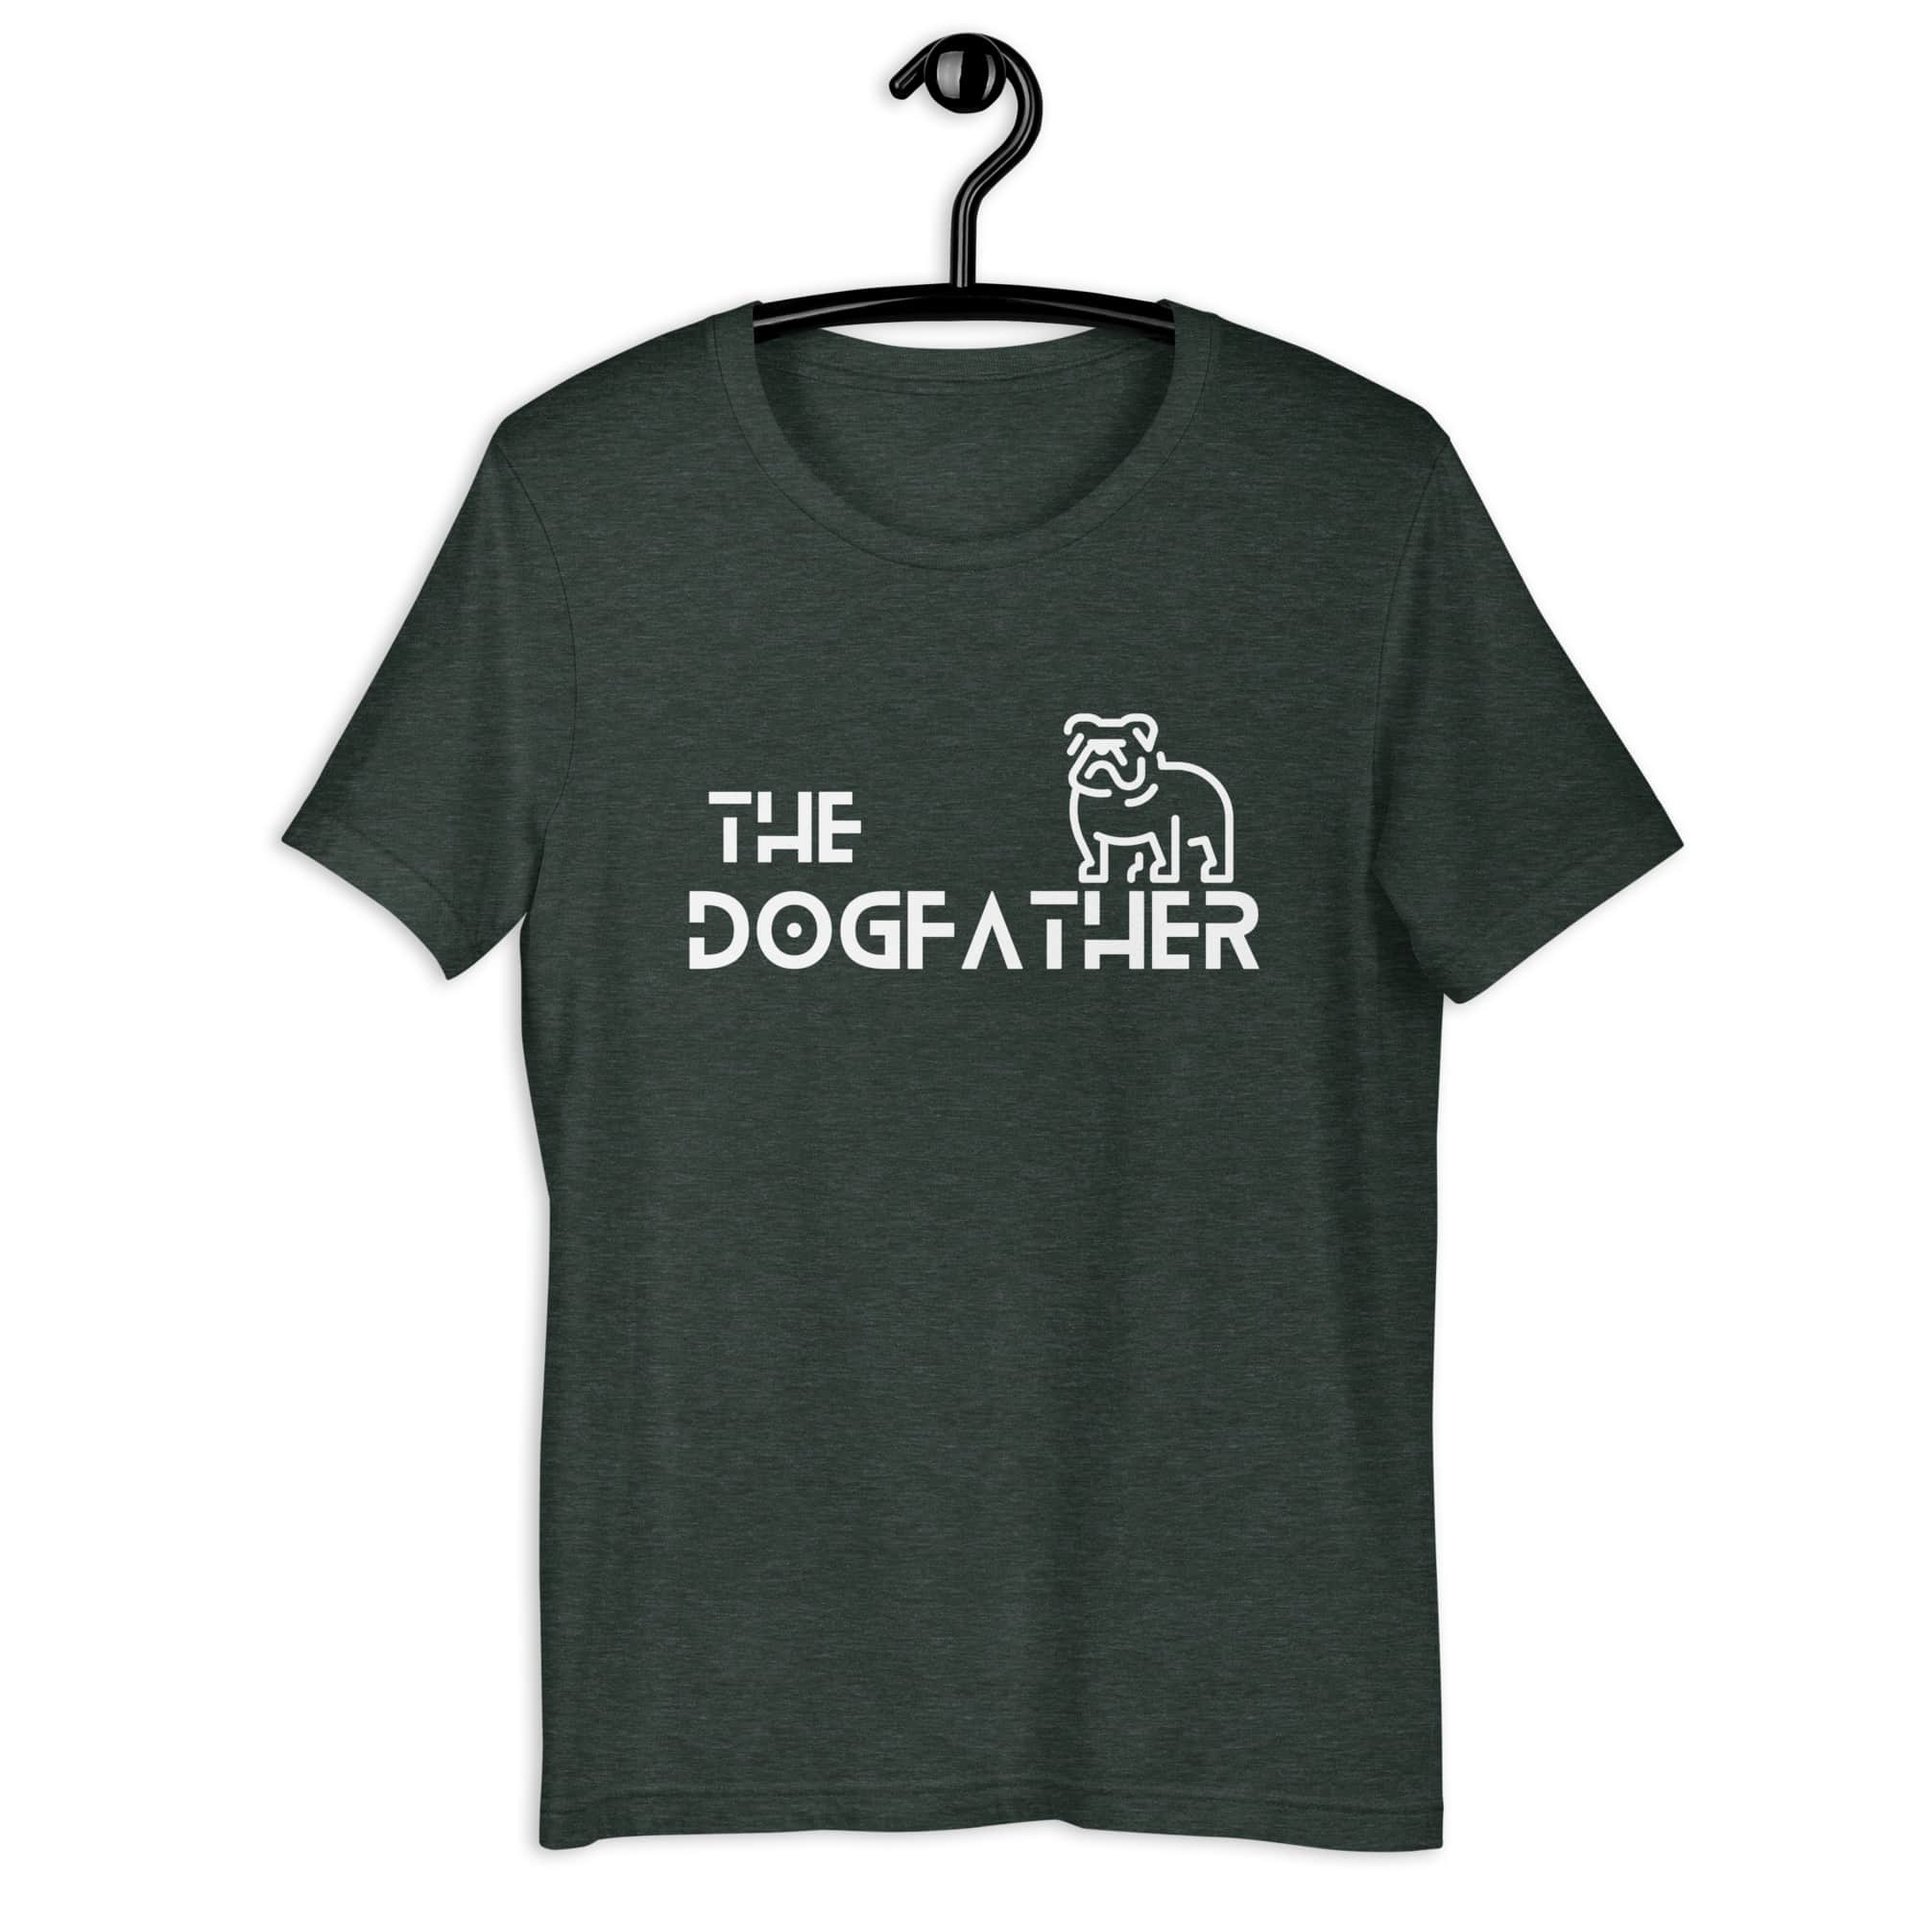 The Dogfather Bulldog Unisex T-Shirt. Heather Forest